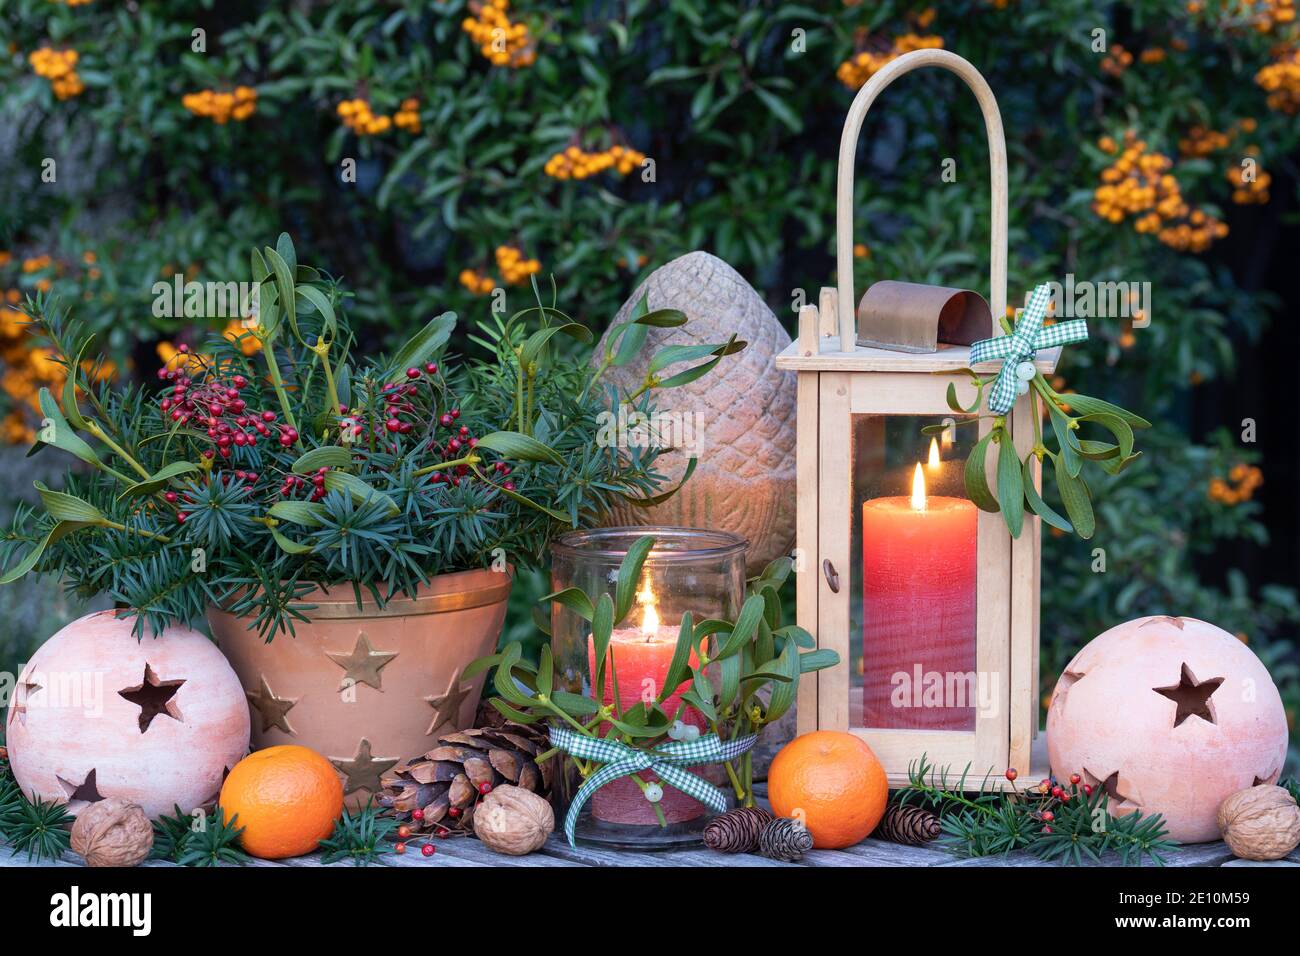 rustic christmas decoration with lantern and bouquet of yew branches, mistletoe and rose hips Stock Photo